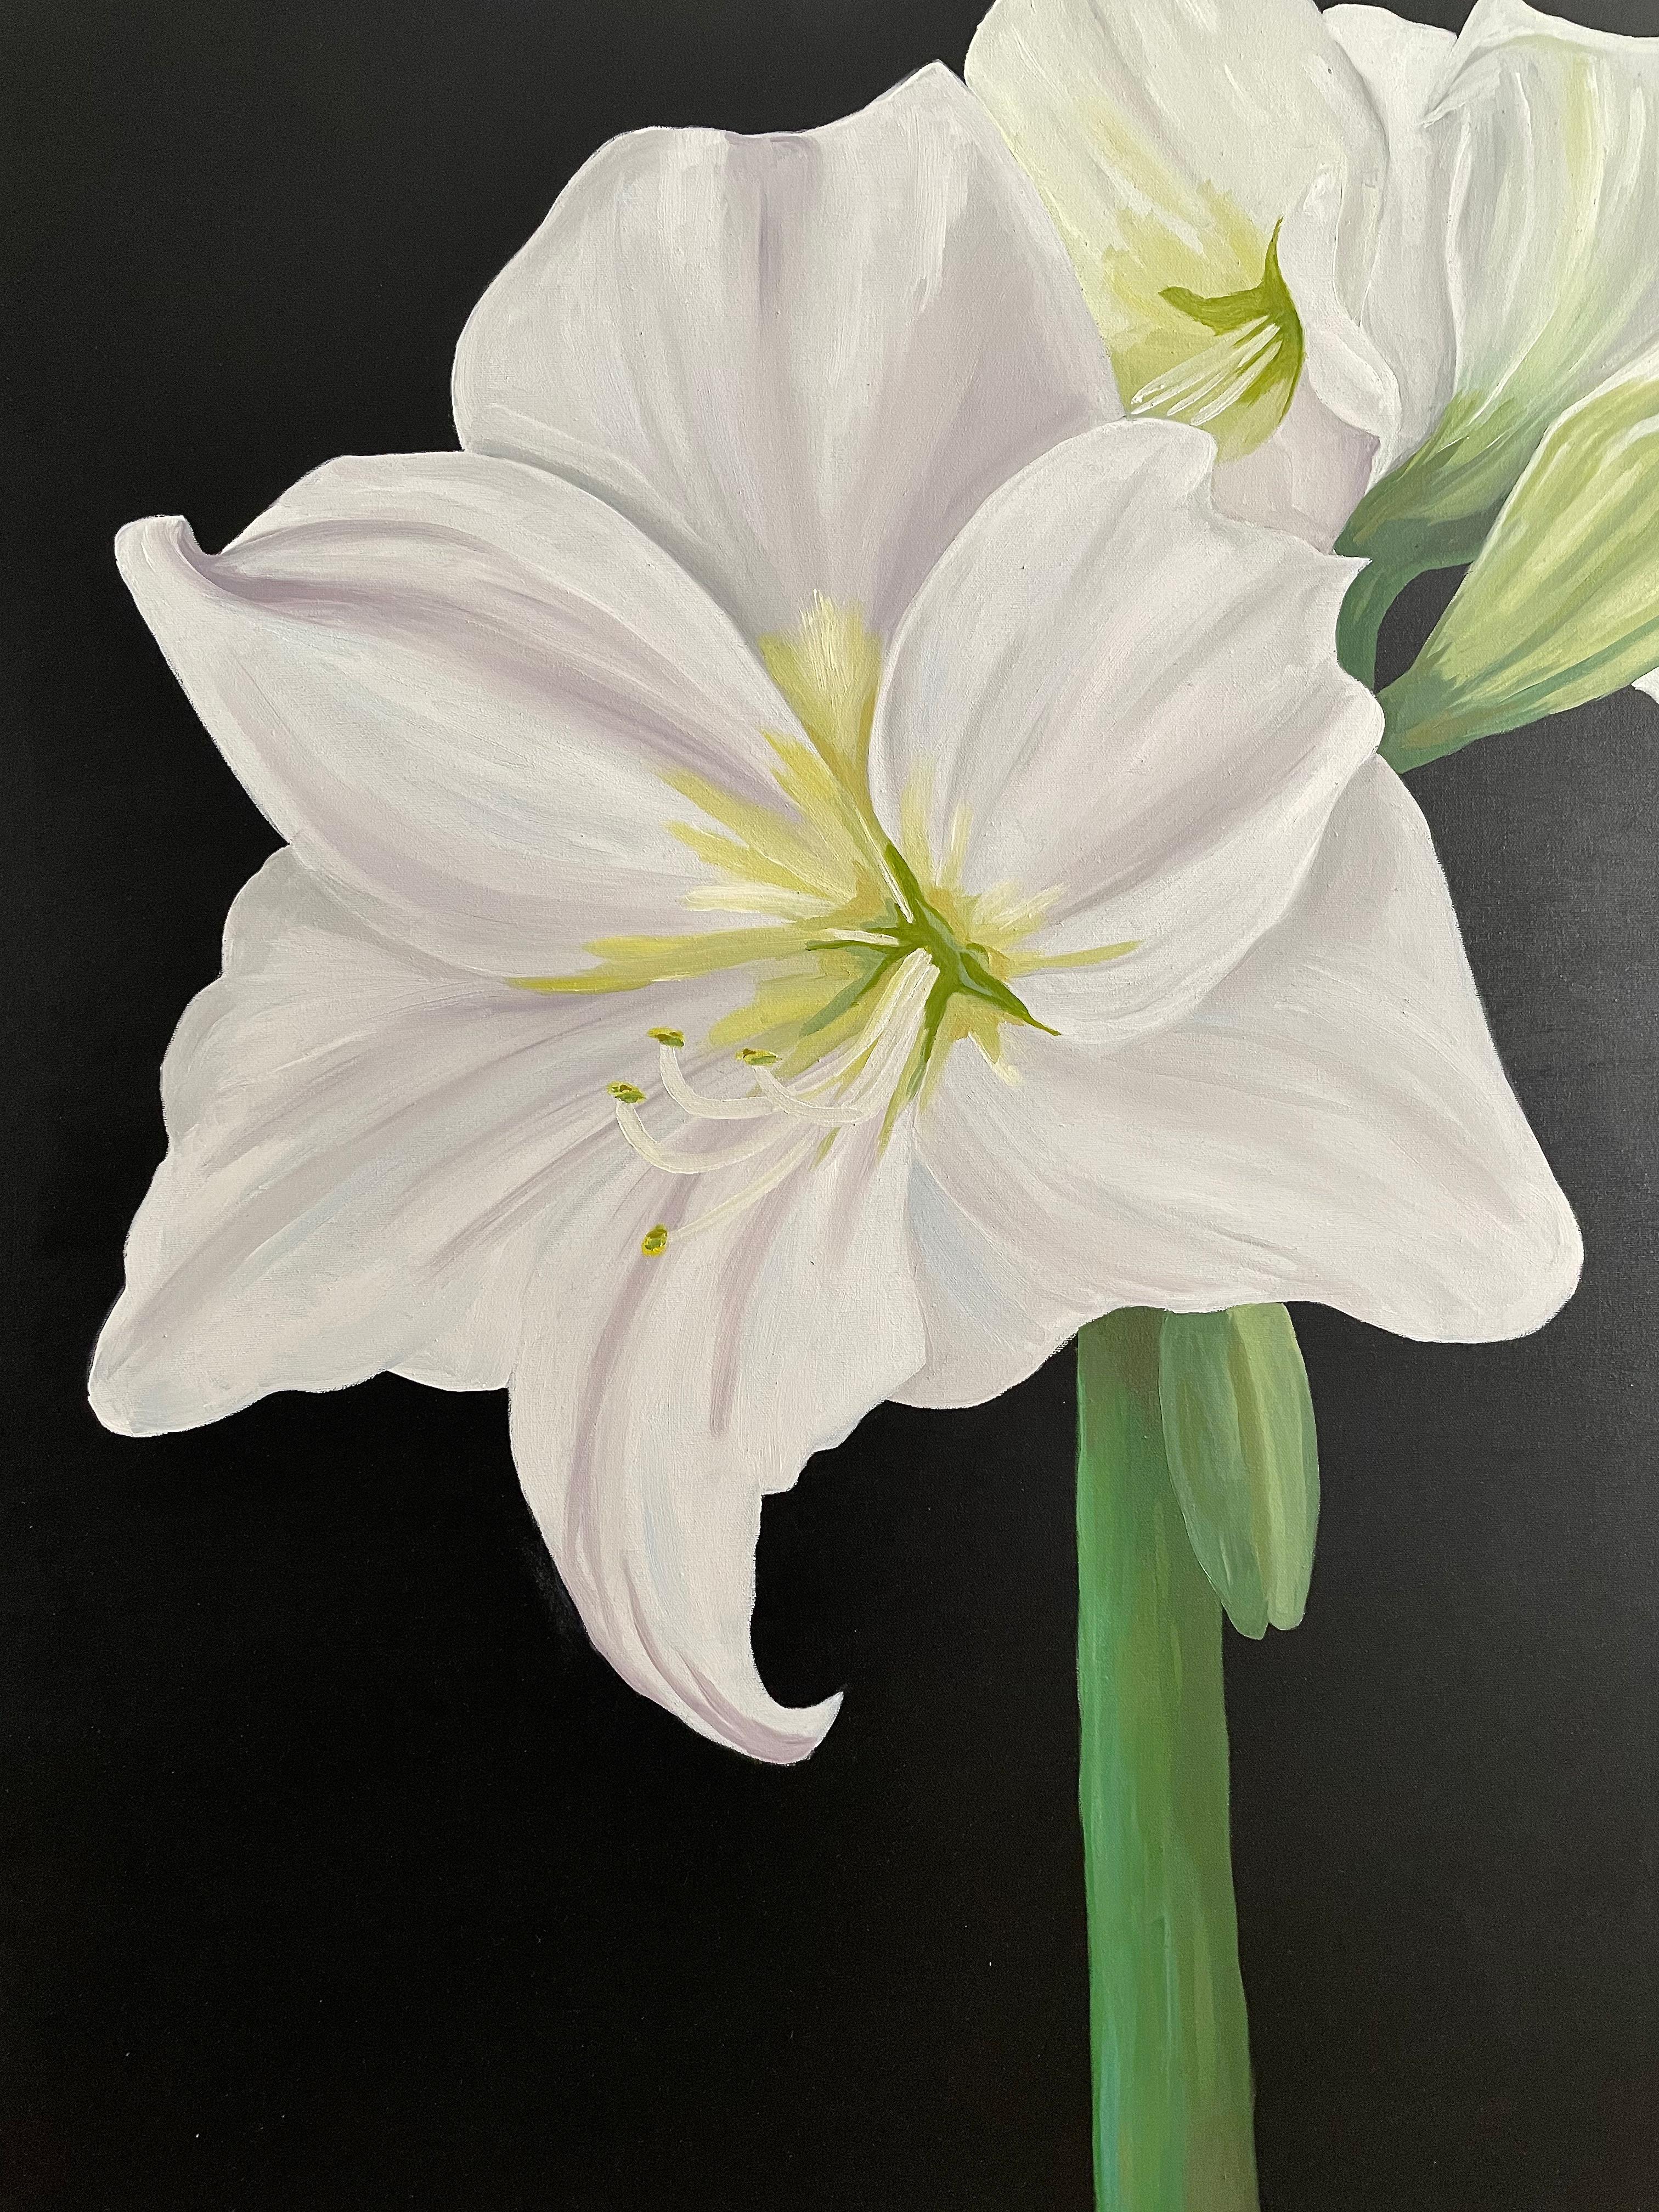 Ken Miller Still-Life Painting - Amaryllis, Occasionally Referred to as "Naked Lady." Title - Amaryllis